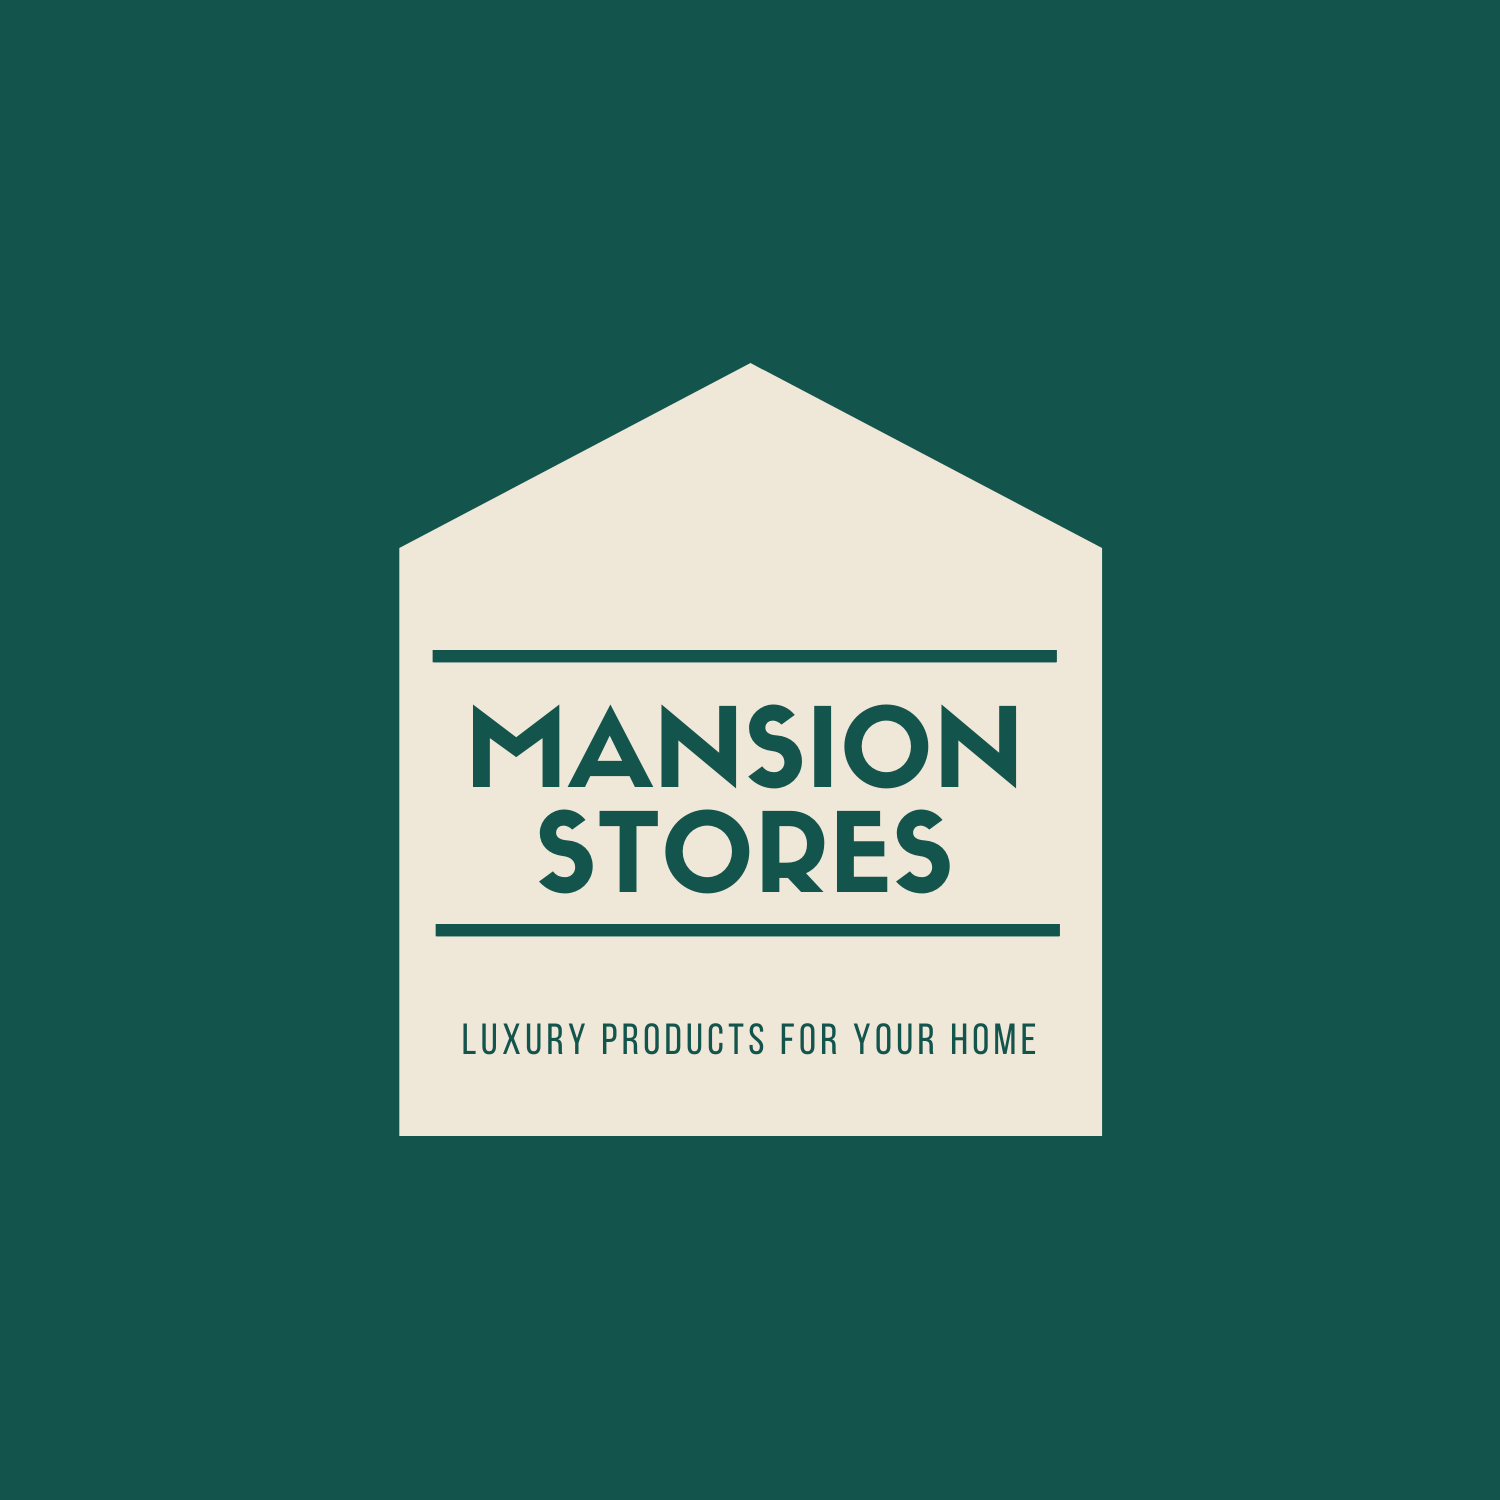 Mansion Stores